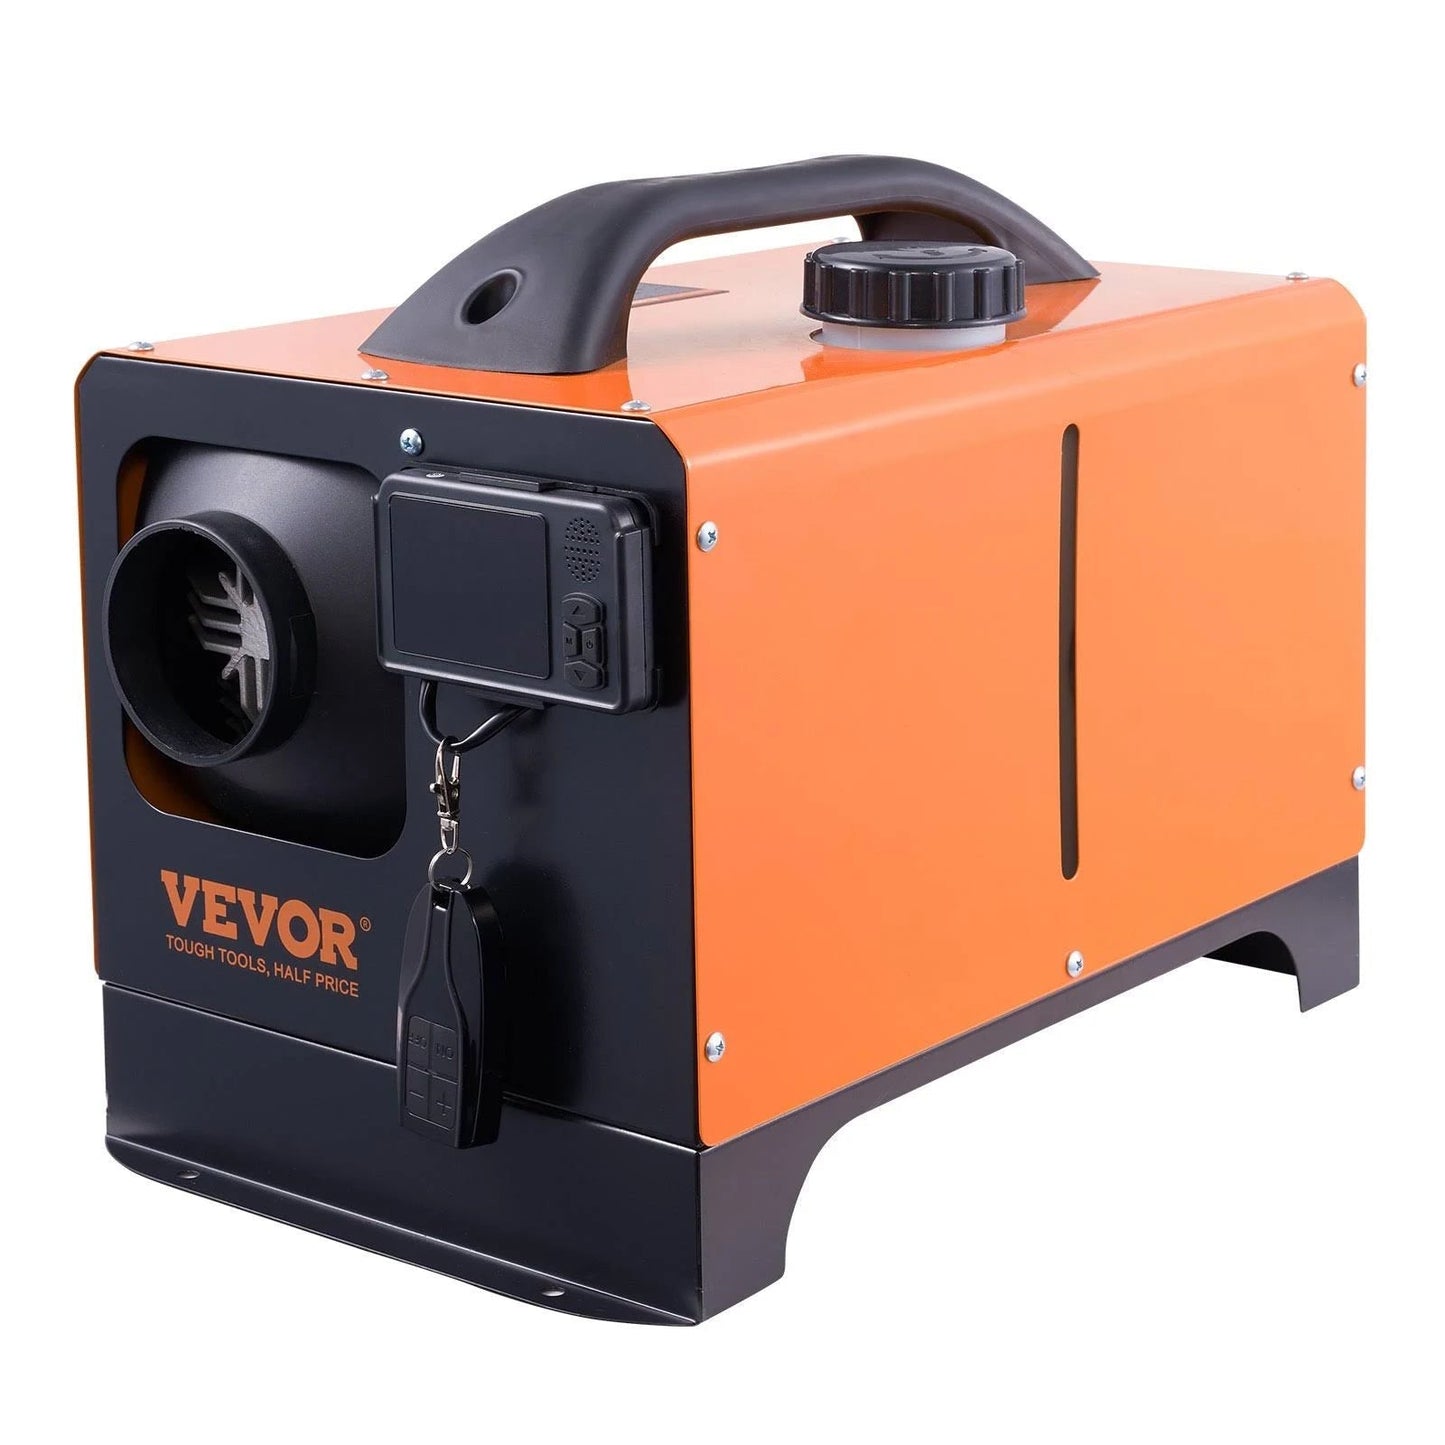 VEVOR Diesel Air Heater 17,060 BTU 12-Volt All-on-1 Diesel Heater 5KW Other  Fuel Type Space Heater with Remote Control and LCD ZCJRQLS12V5KW4YOPV9 -  The Home Depot